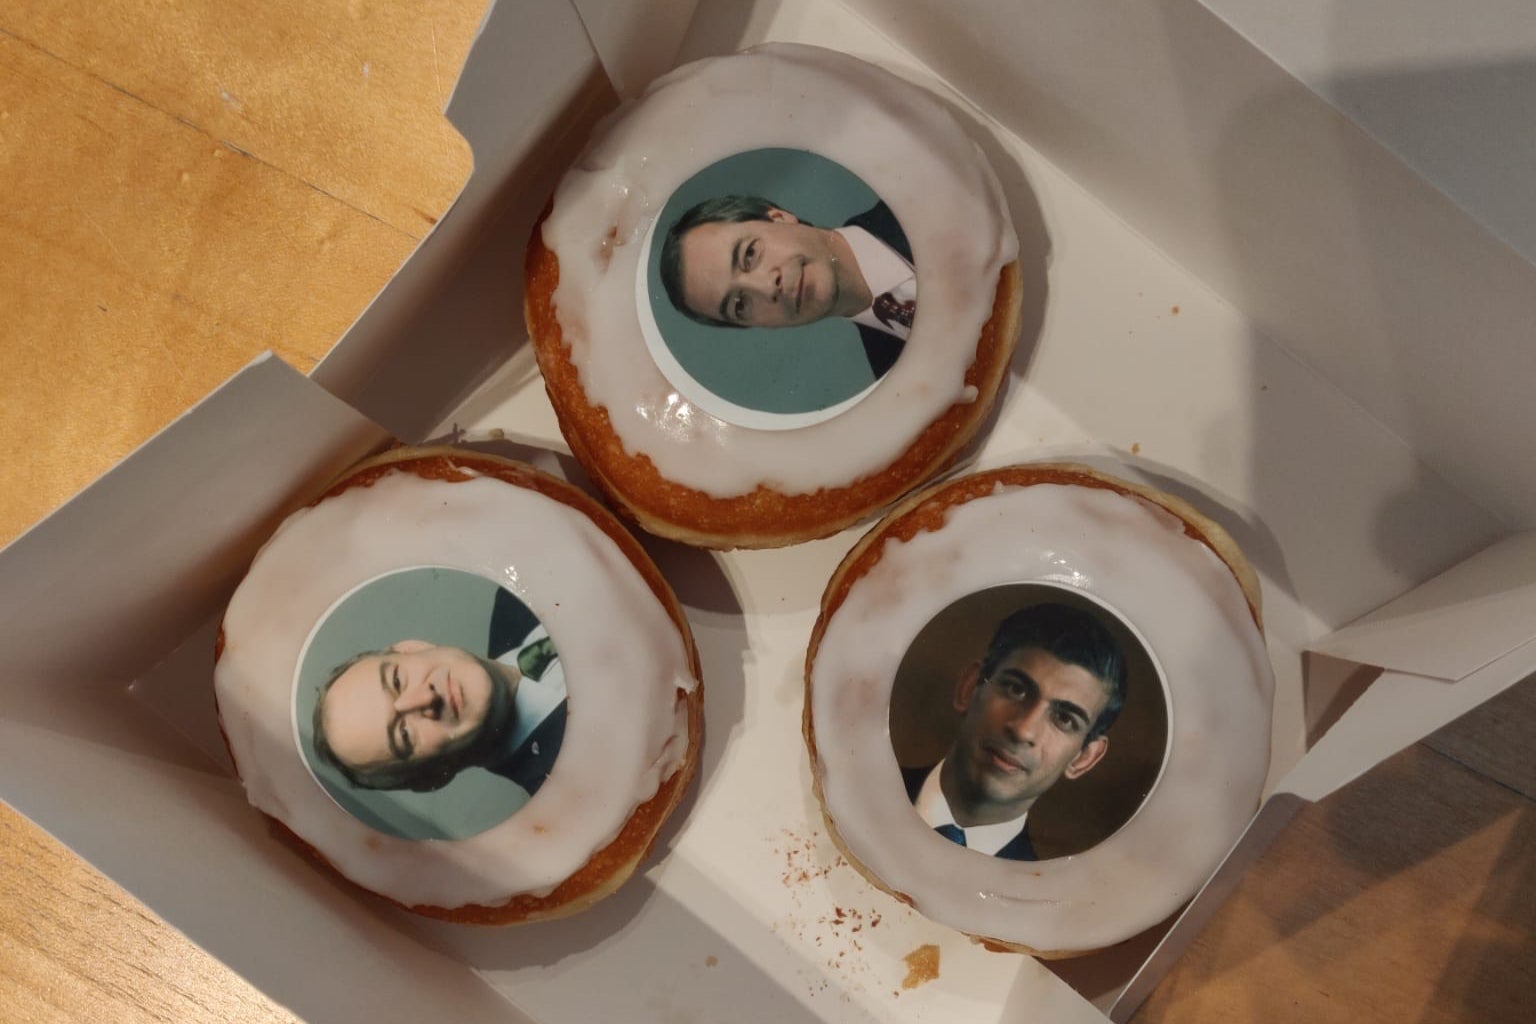 Doughnuts featuring party leaders’ heads have been spotted in North London